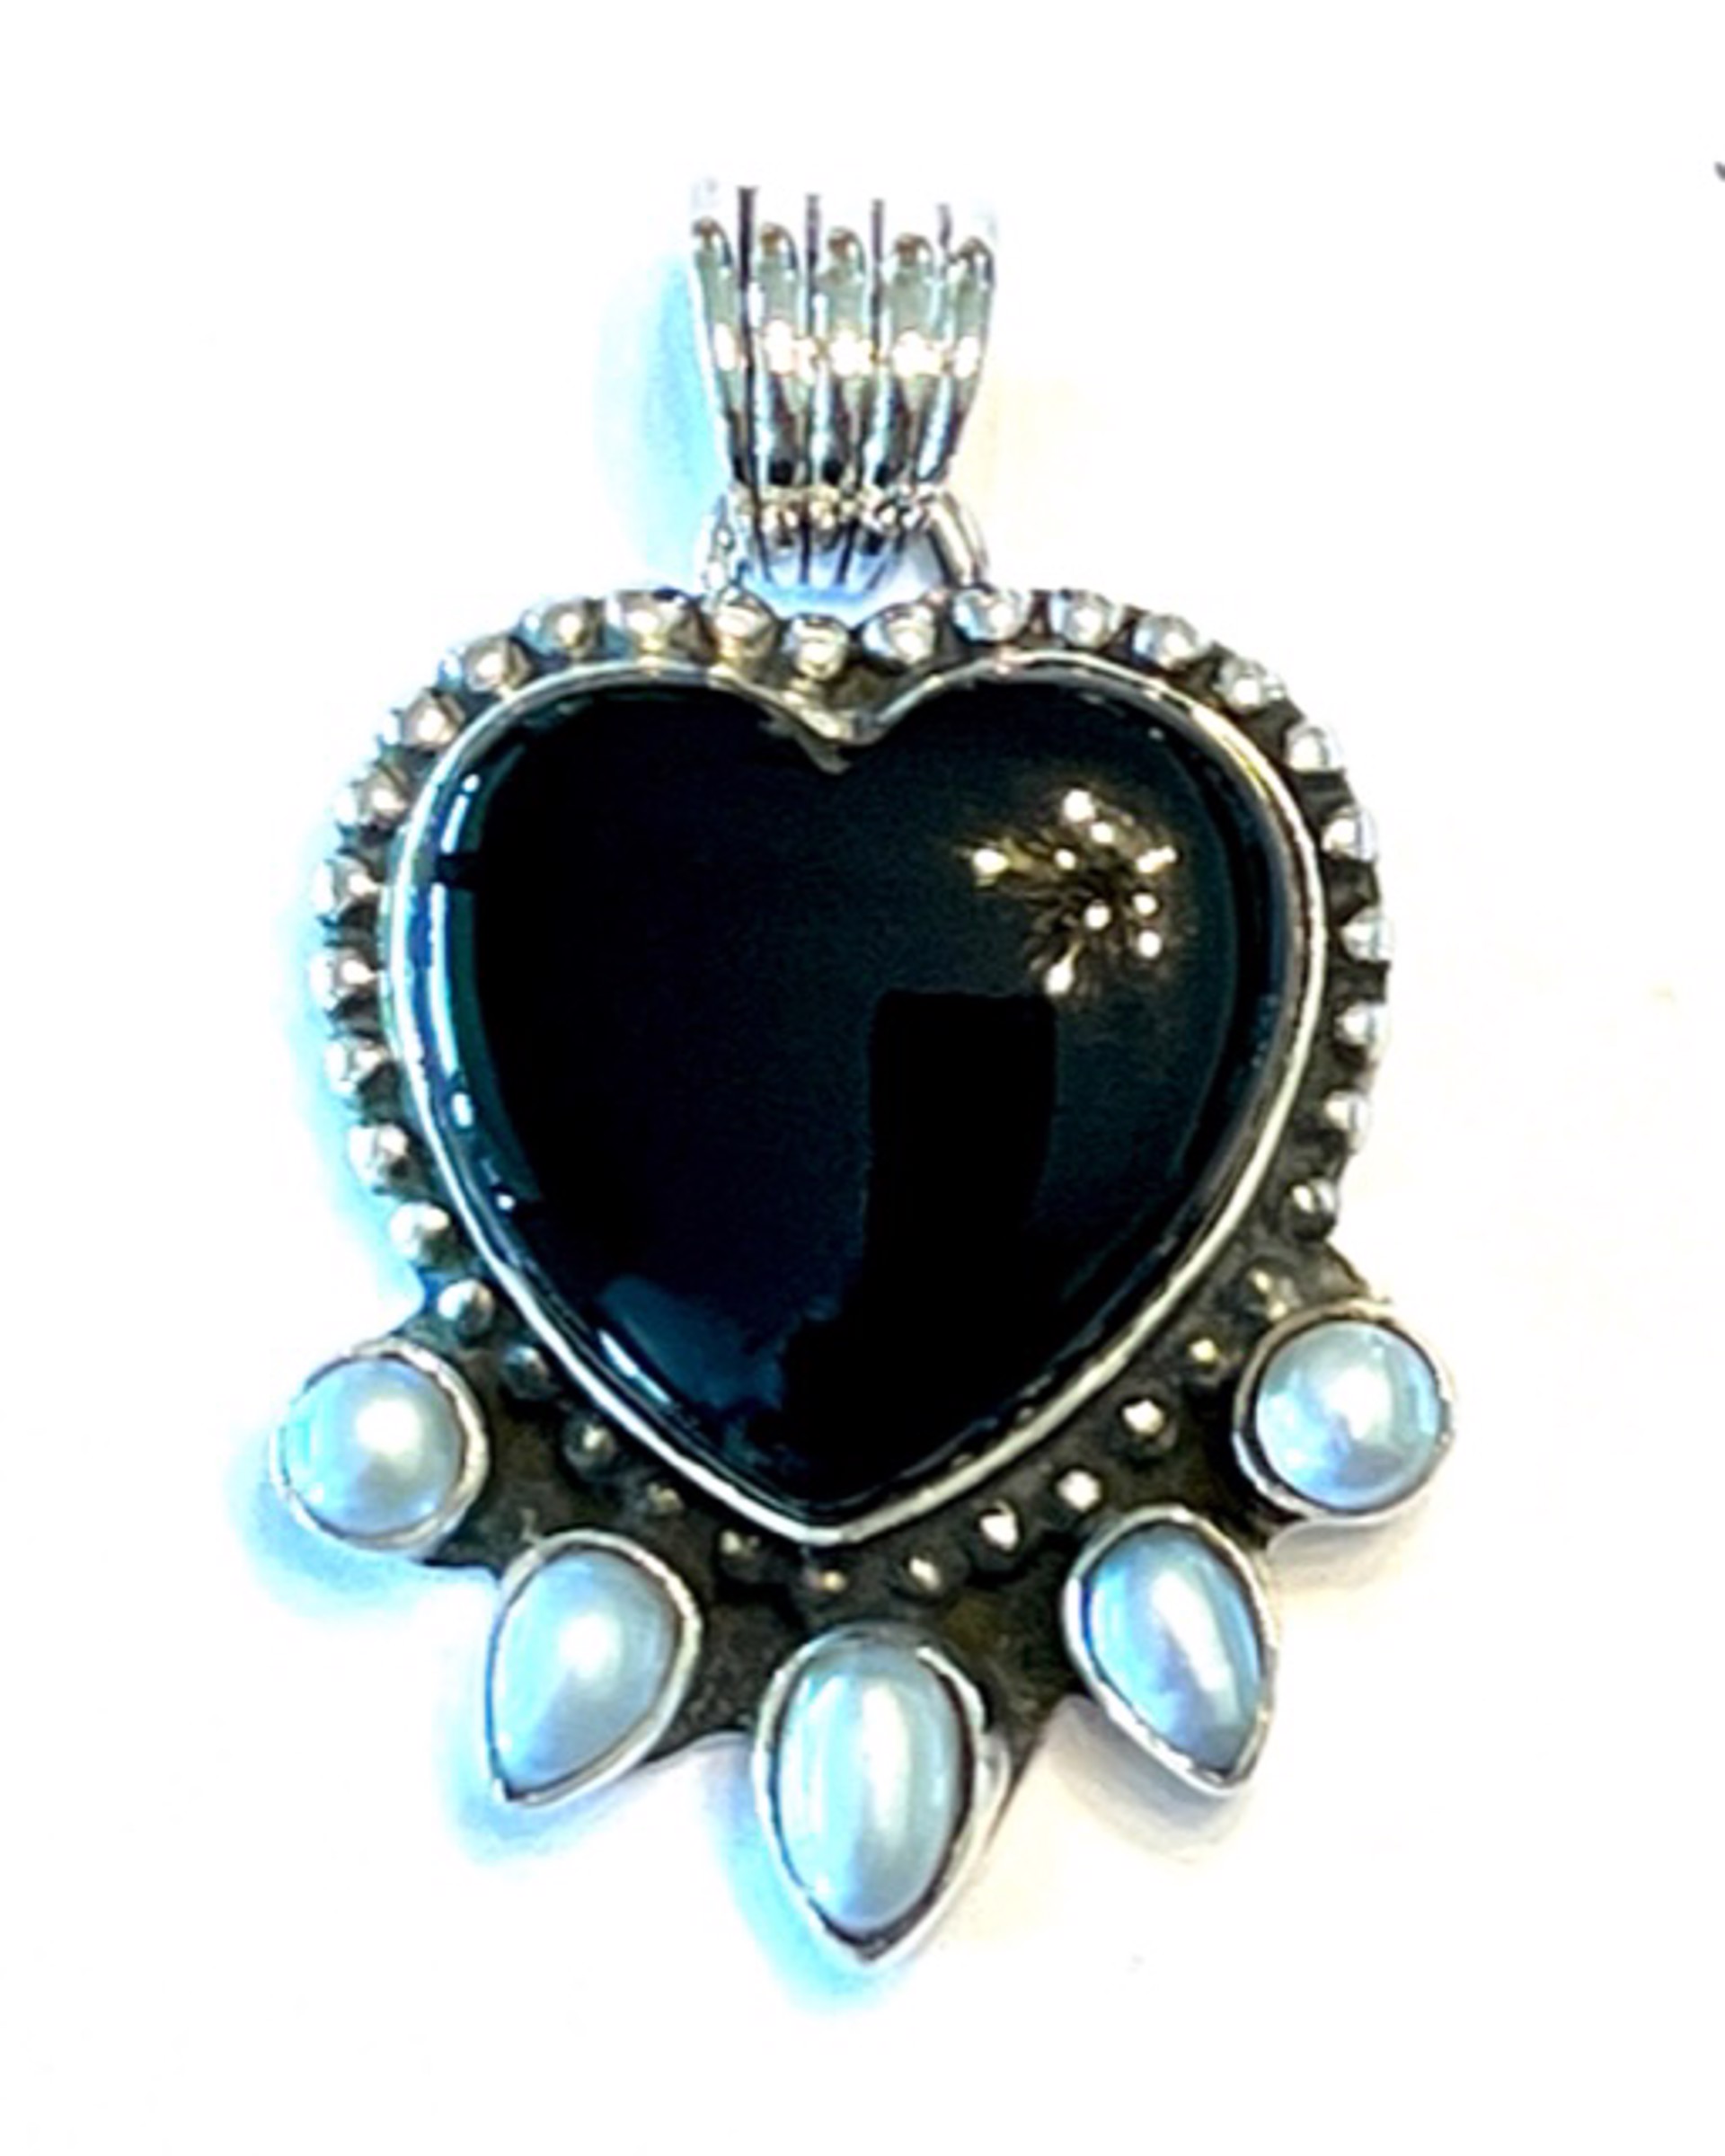 Pendant - Heart, Onyx with Pearl Drops by Dan Dodson